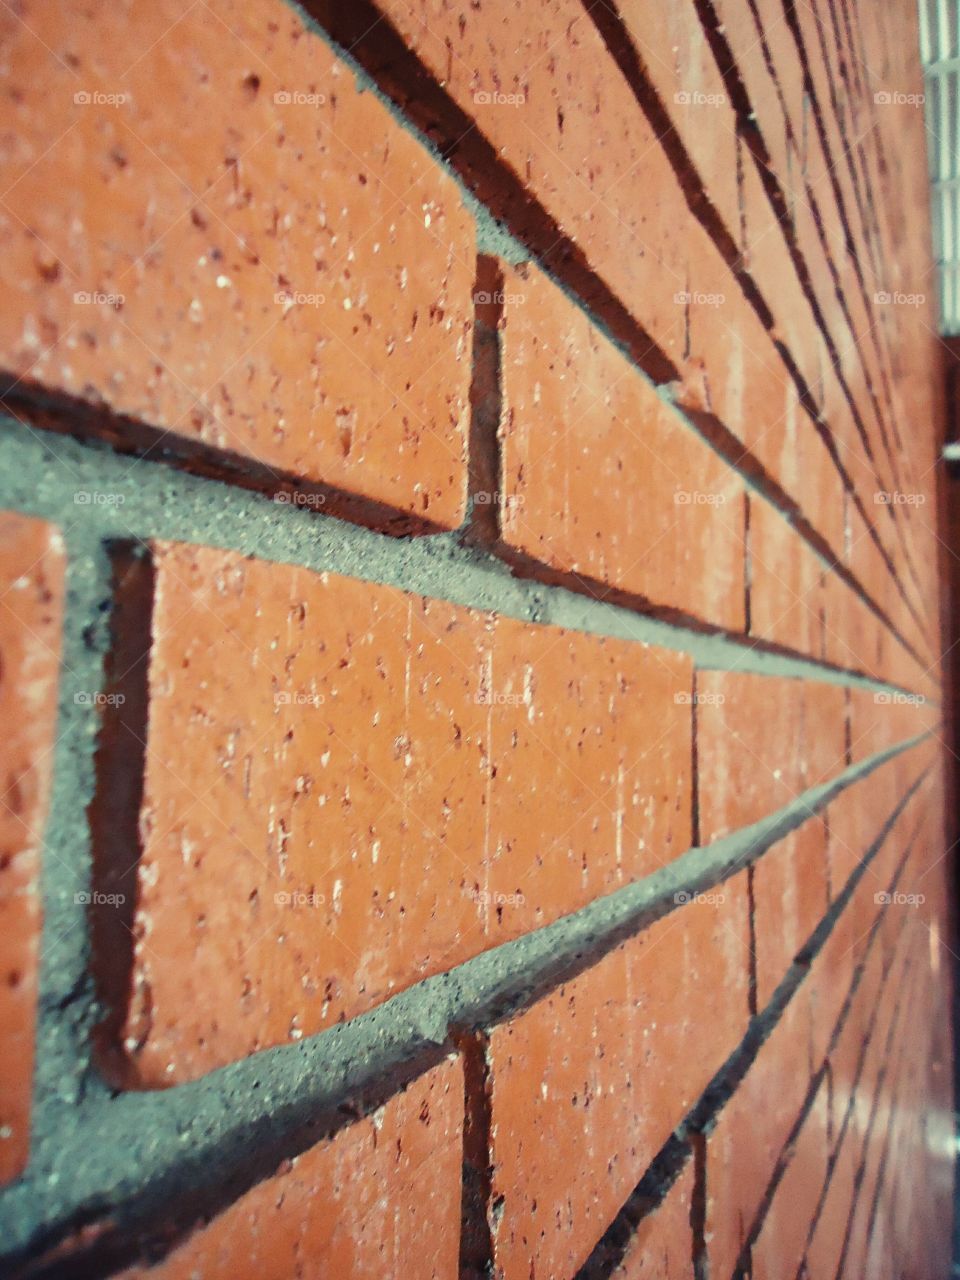 brick wall. this wall is part of an ancient arts school in  my hometown, called  "Casa del Arte" (House of Art)